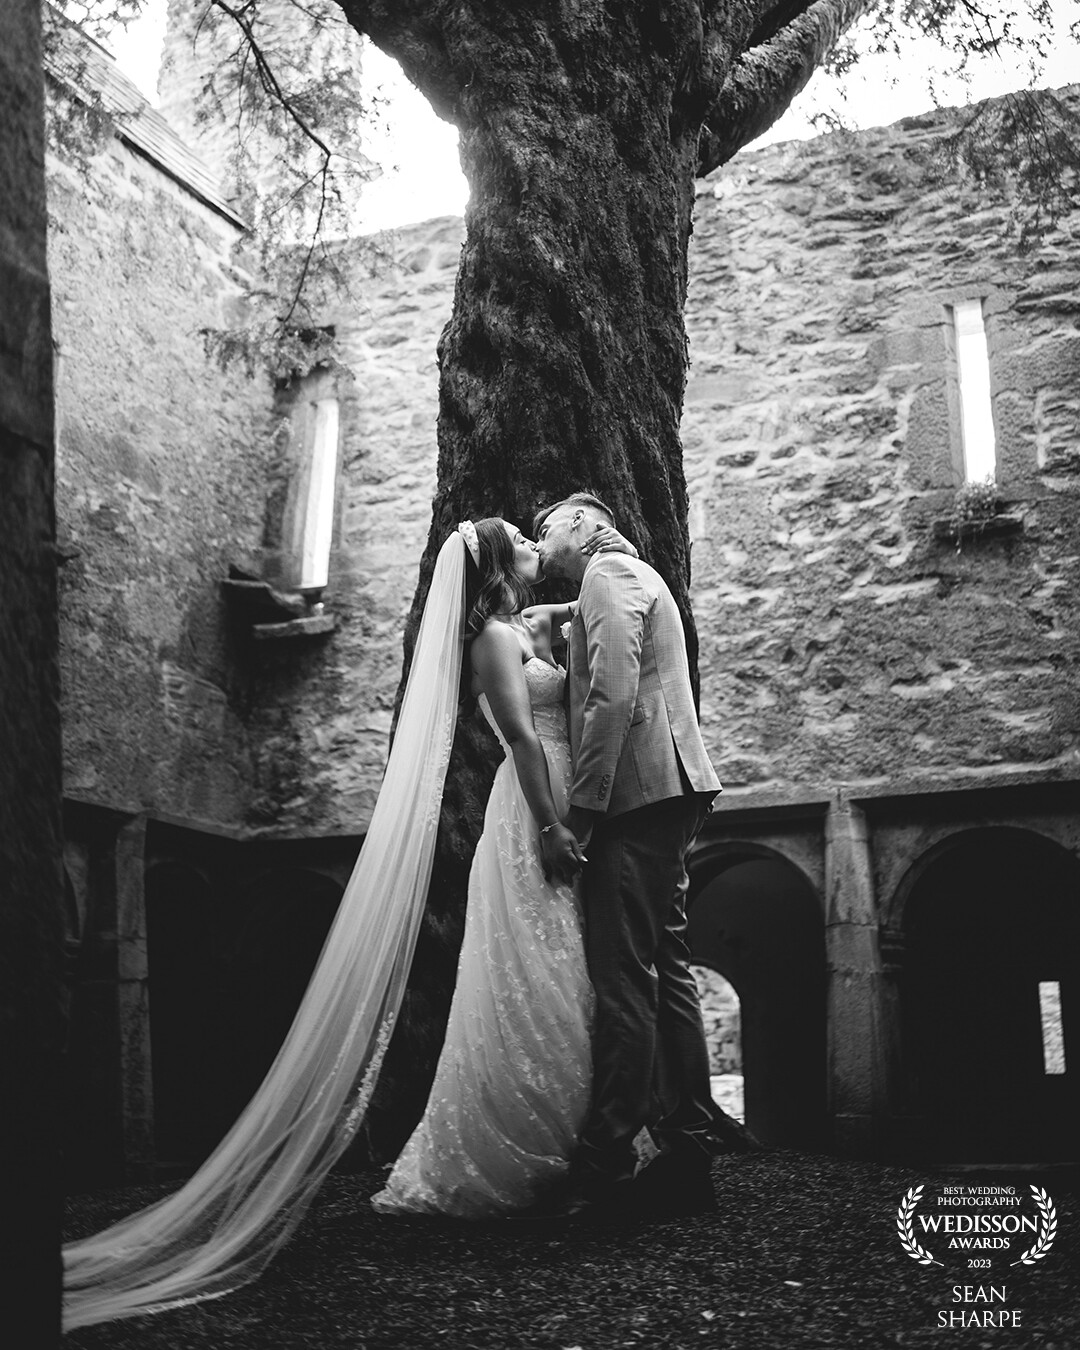 Louise and Ted under the beautiful yew tree growing inside the ruins of Muckross Abbey, Killarney. Such a unique place and a stunning backdrop for a couple’s session.